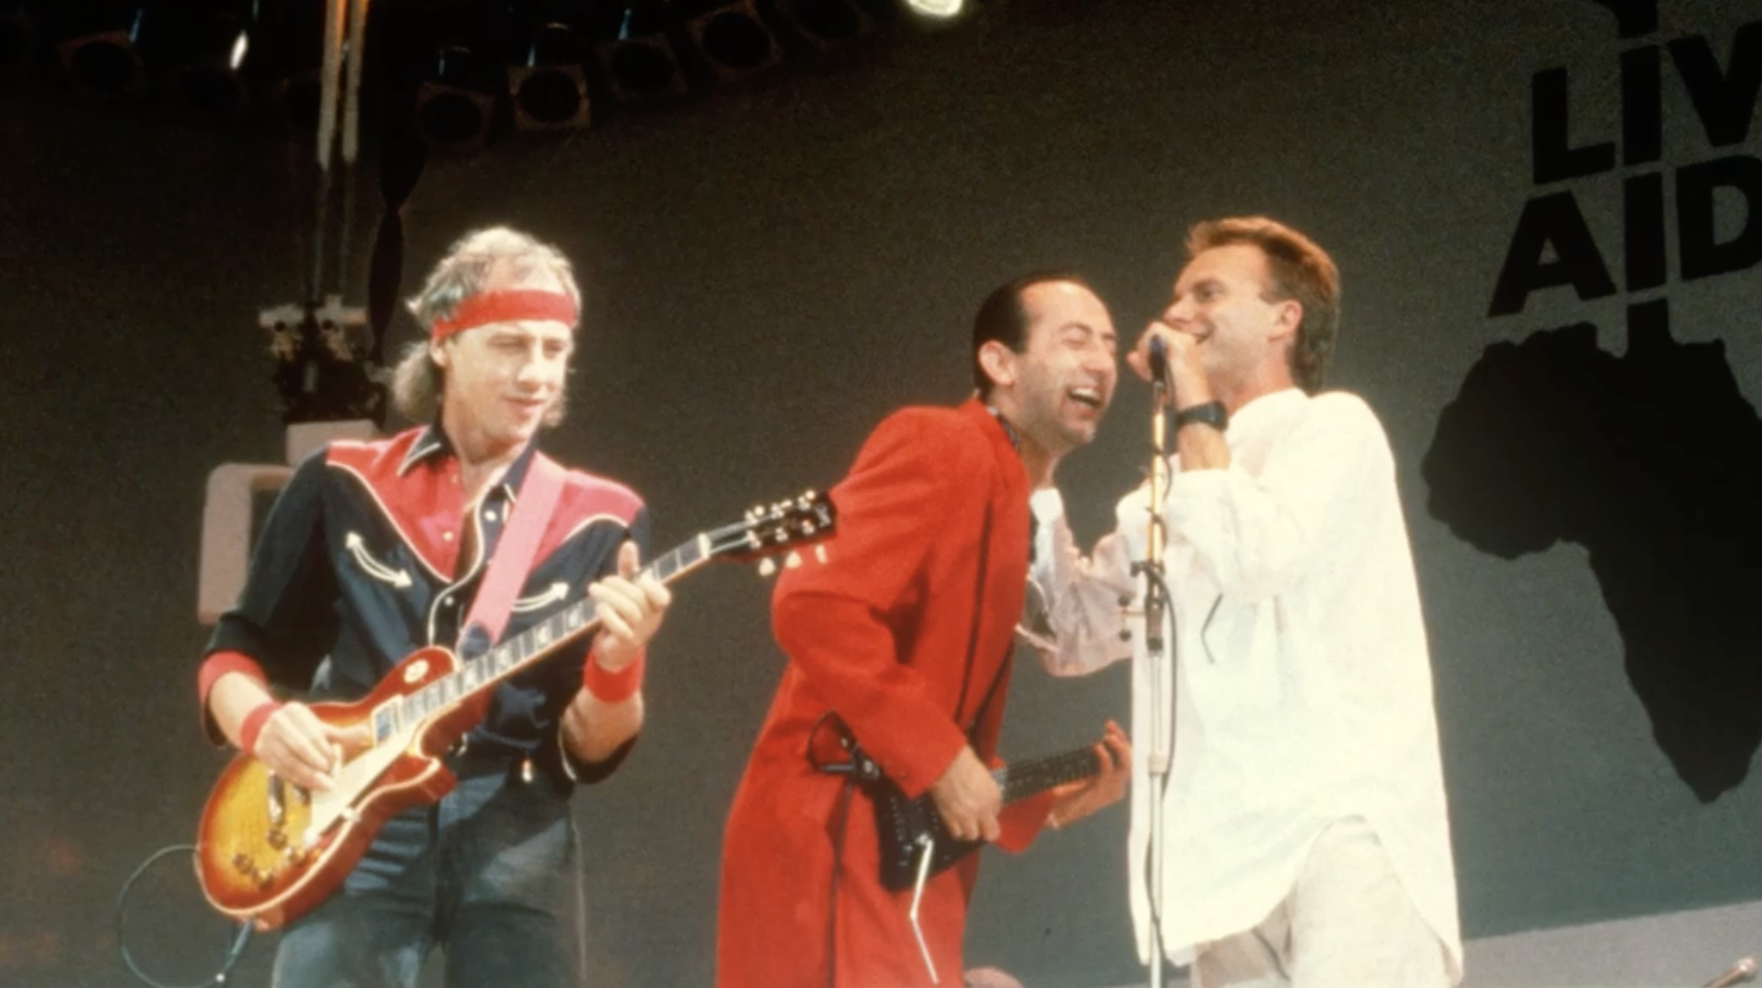 Knopfler playing at Live Aid in 1985. /Christies.com